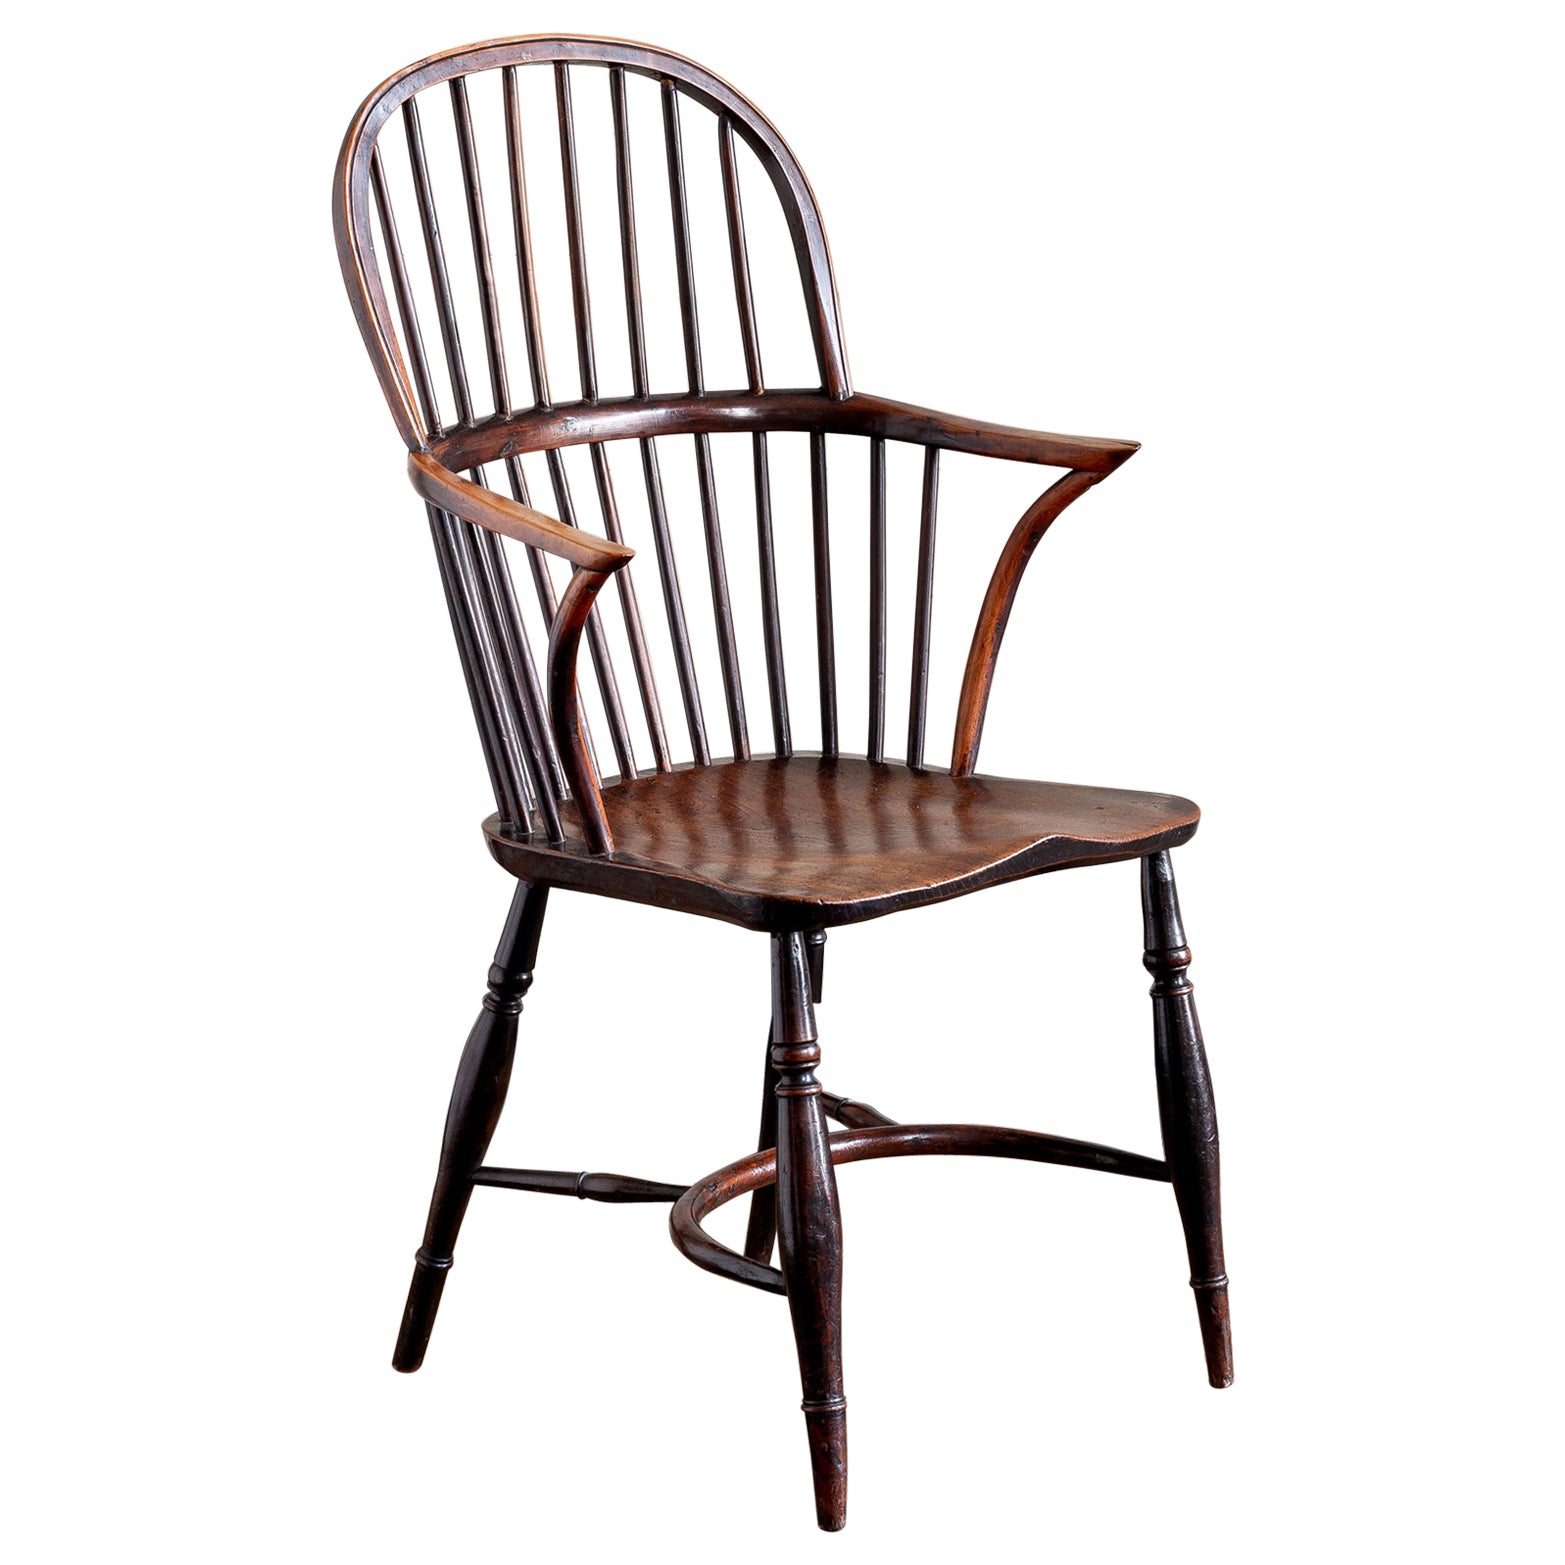 Early 19th Century English Thames Valley Windsor Armchair For Sale